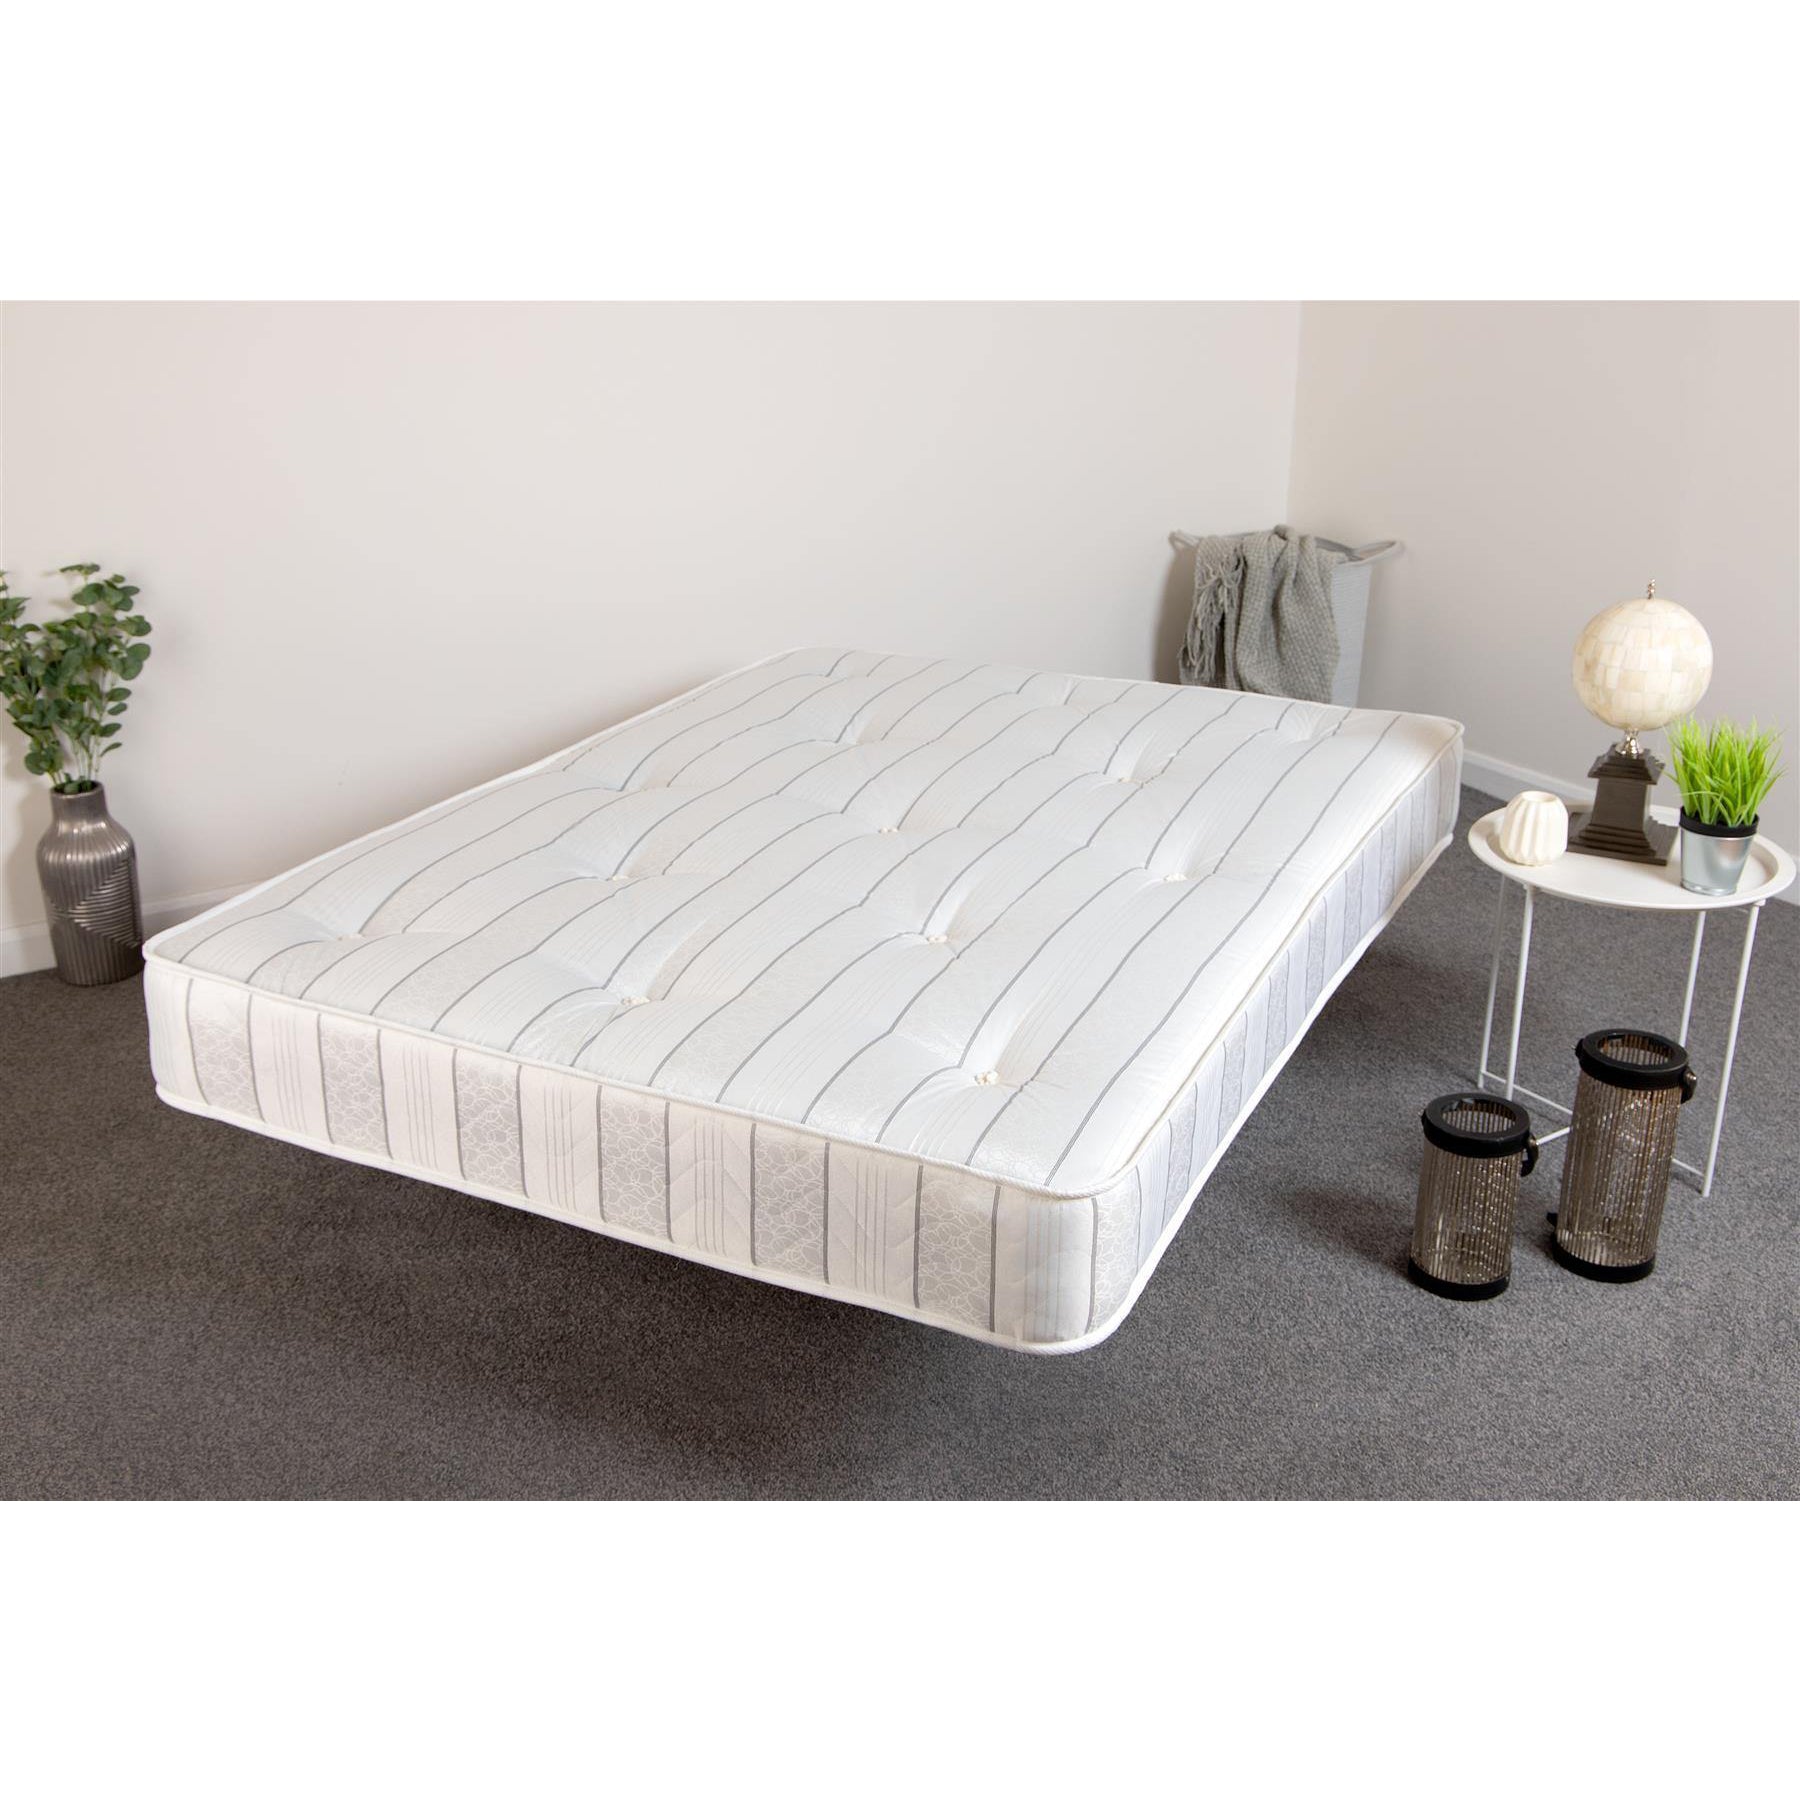 Starlight Beds™ | Traditional Orthopaedic Spring Mattress